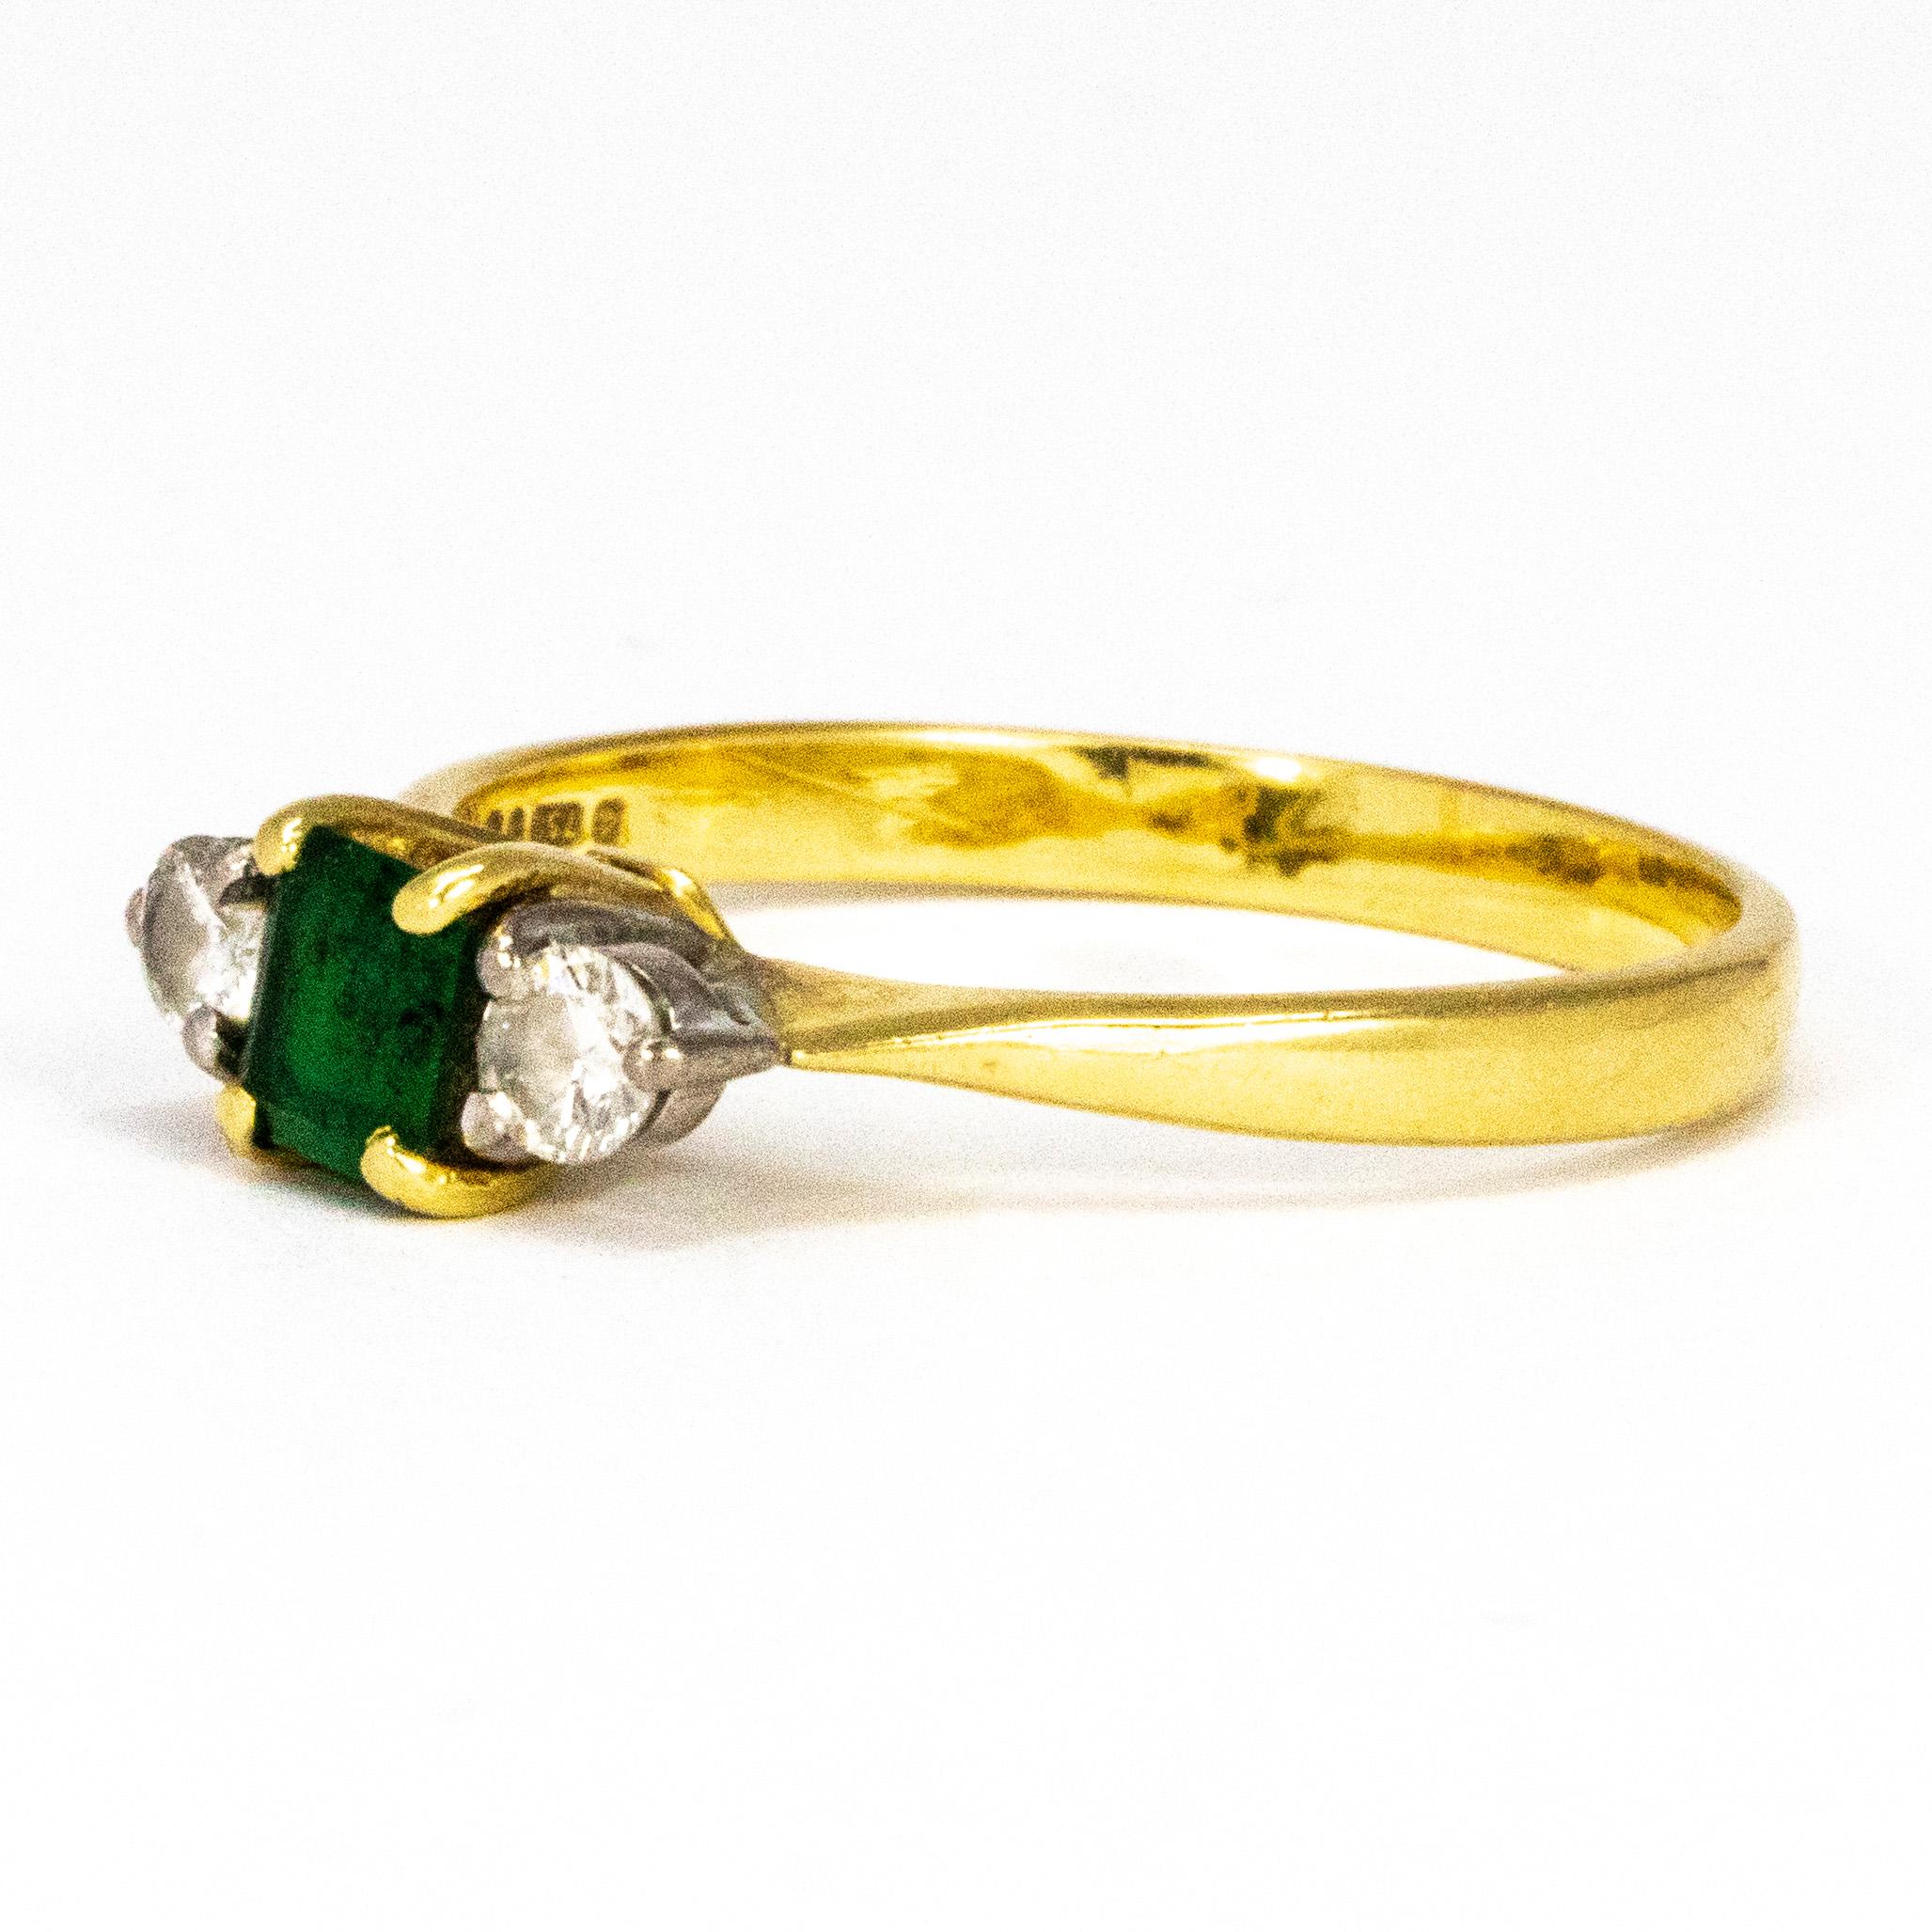 Set in between two gorgeous round cut 10pt diamonds sits a stunning deep green emerald measuring 40pts. The stones are set in simple claw settings and the ring is modelled in 18ct gold.

Ring Size: P 1/2 or 7 3/4